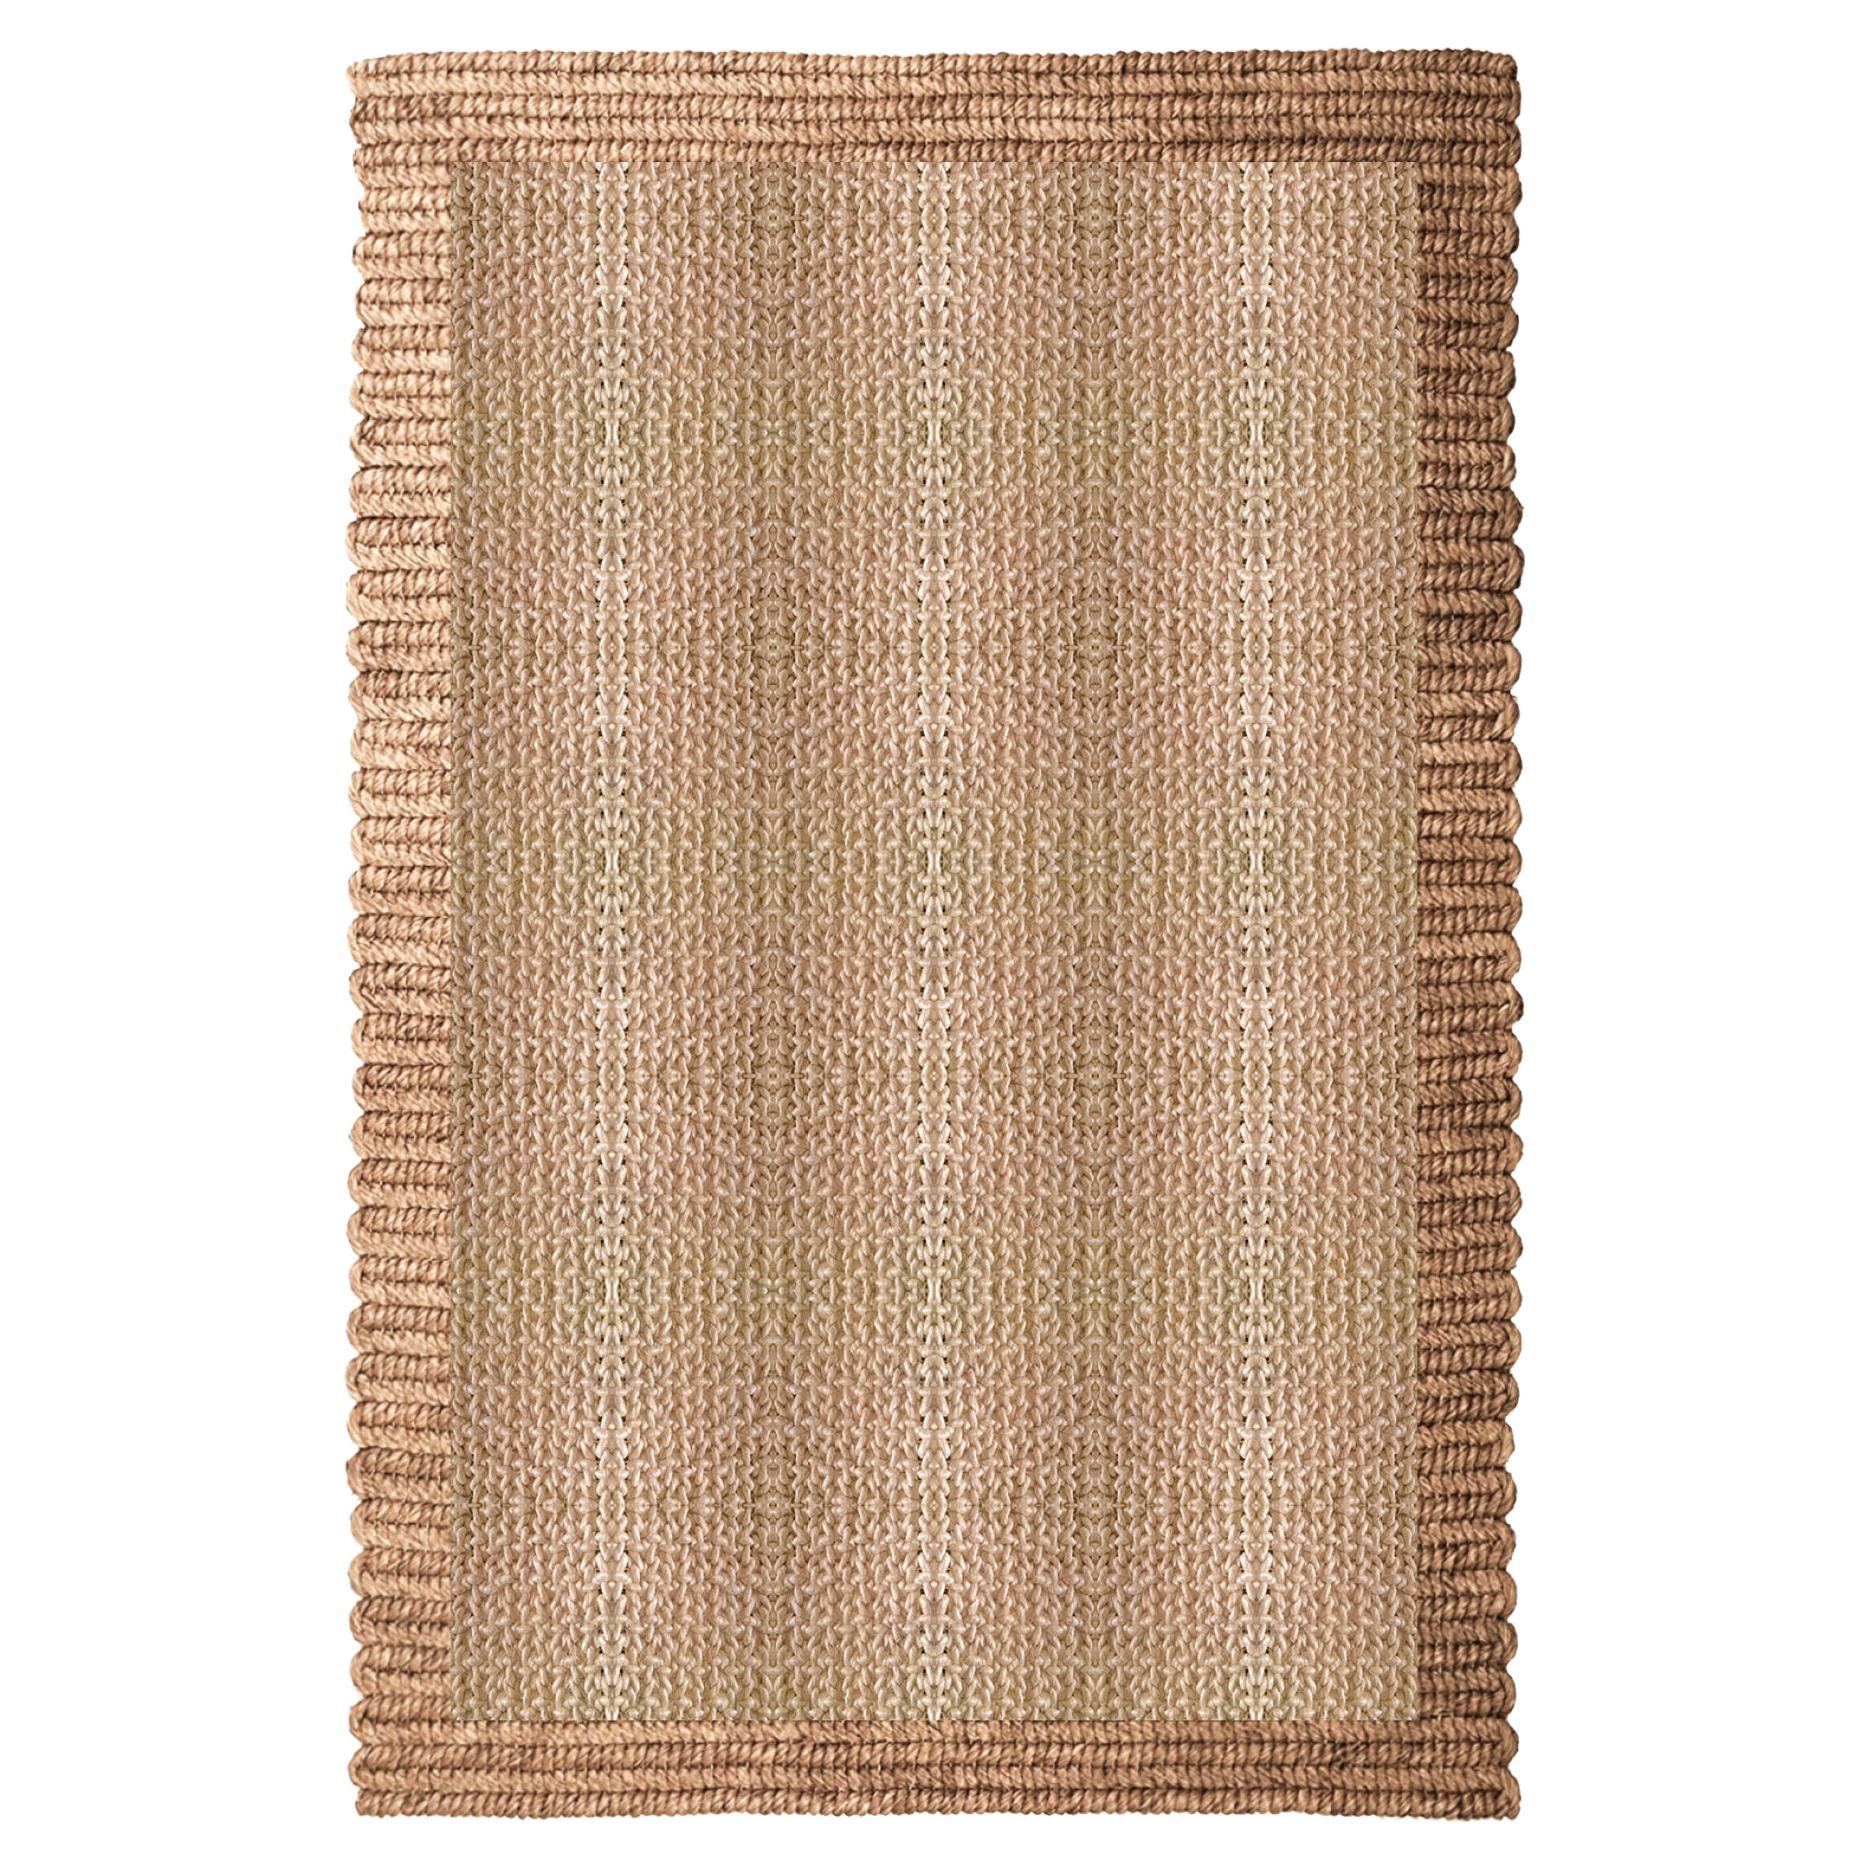 'Nap Uni' Rug in Abaca, by Claire Vos for Musett Design